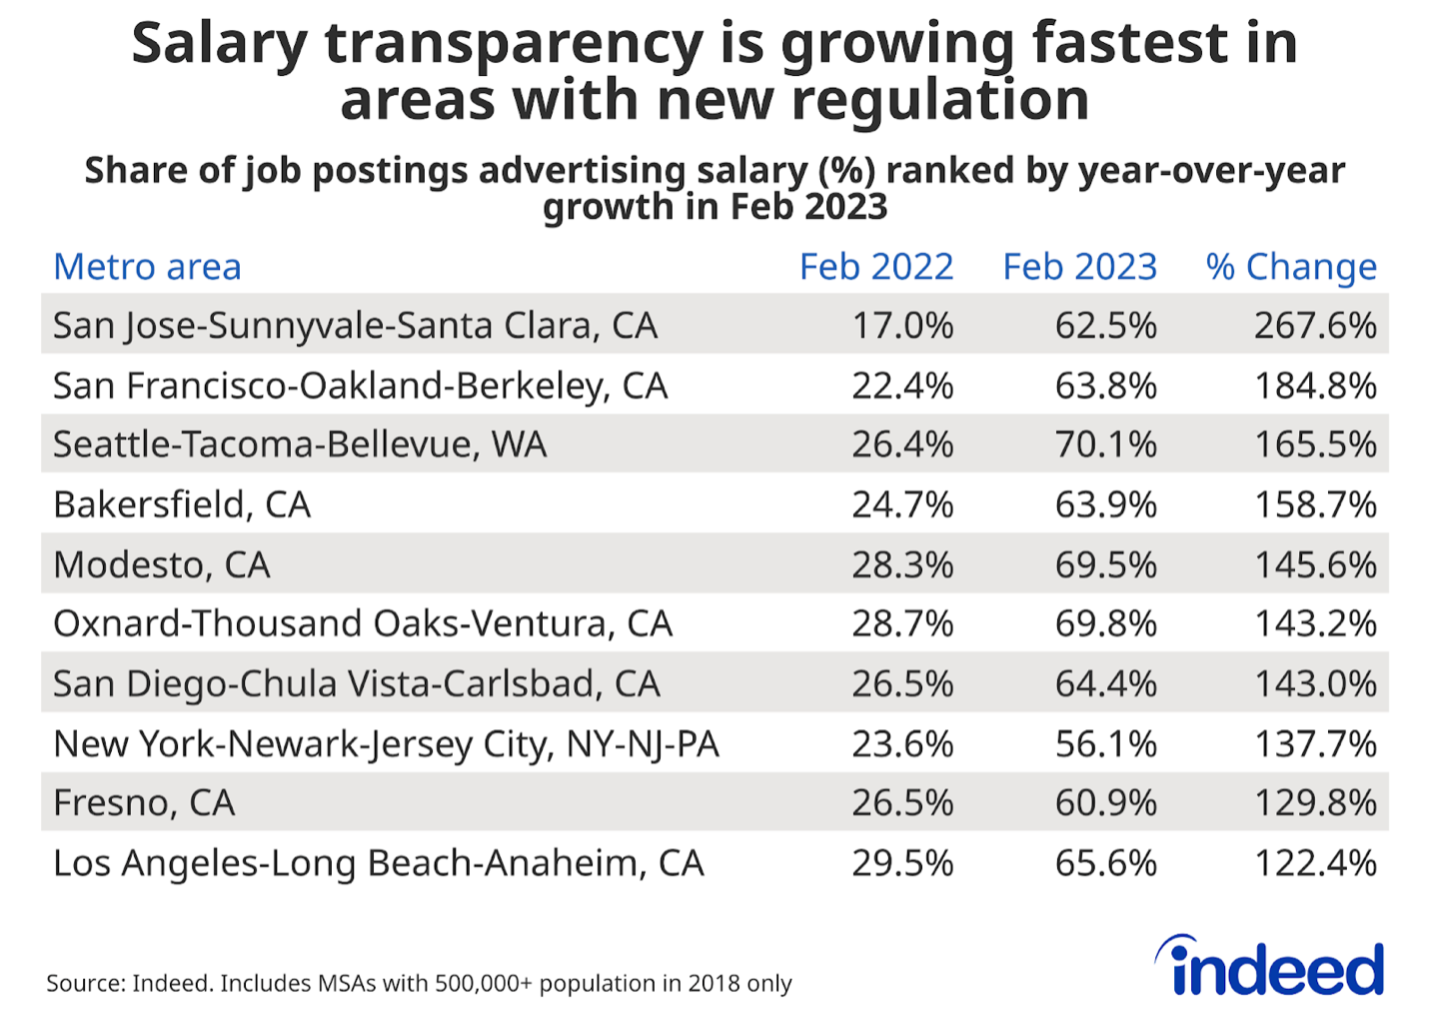 Salary transparency is growing fastest in areas with new regulation.